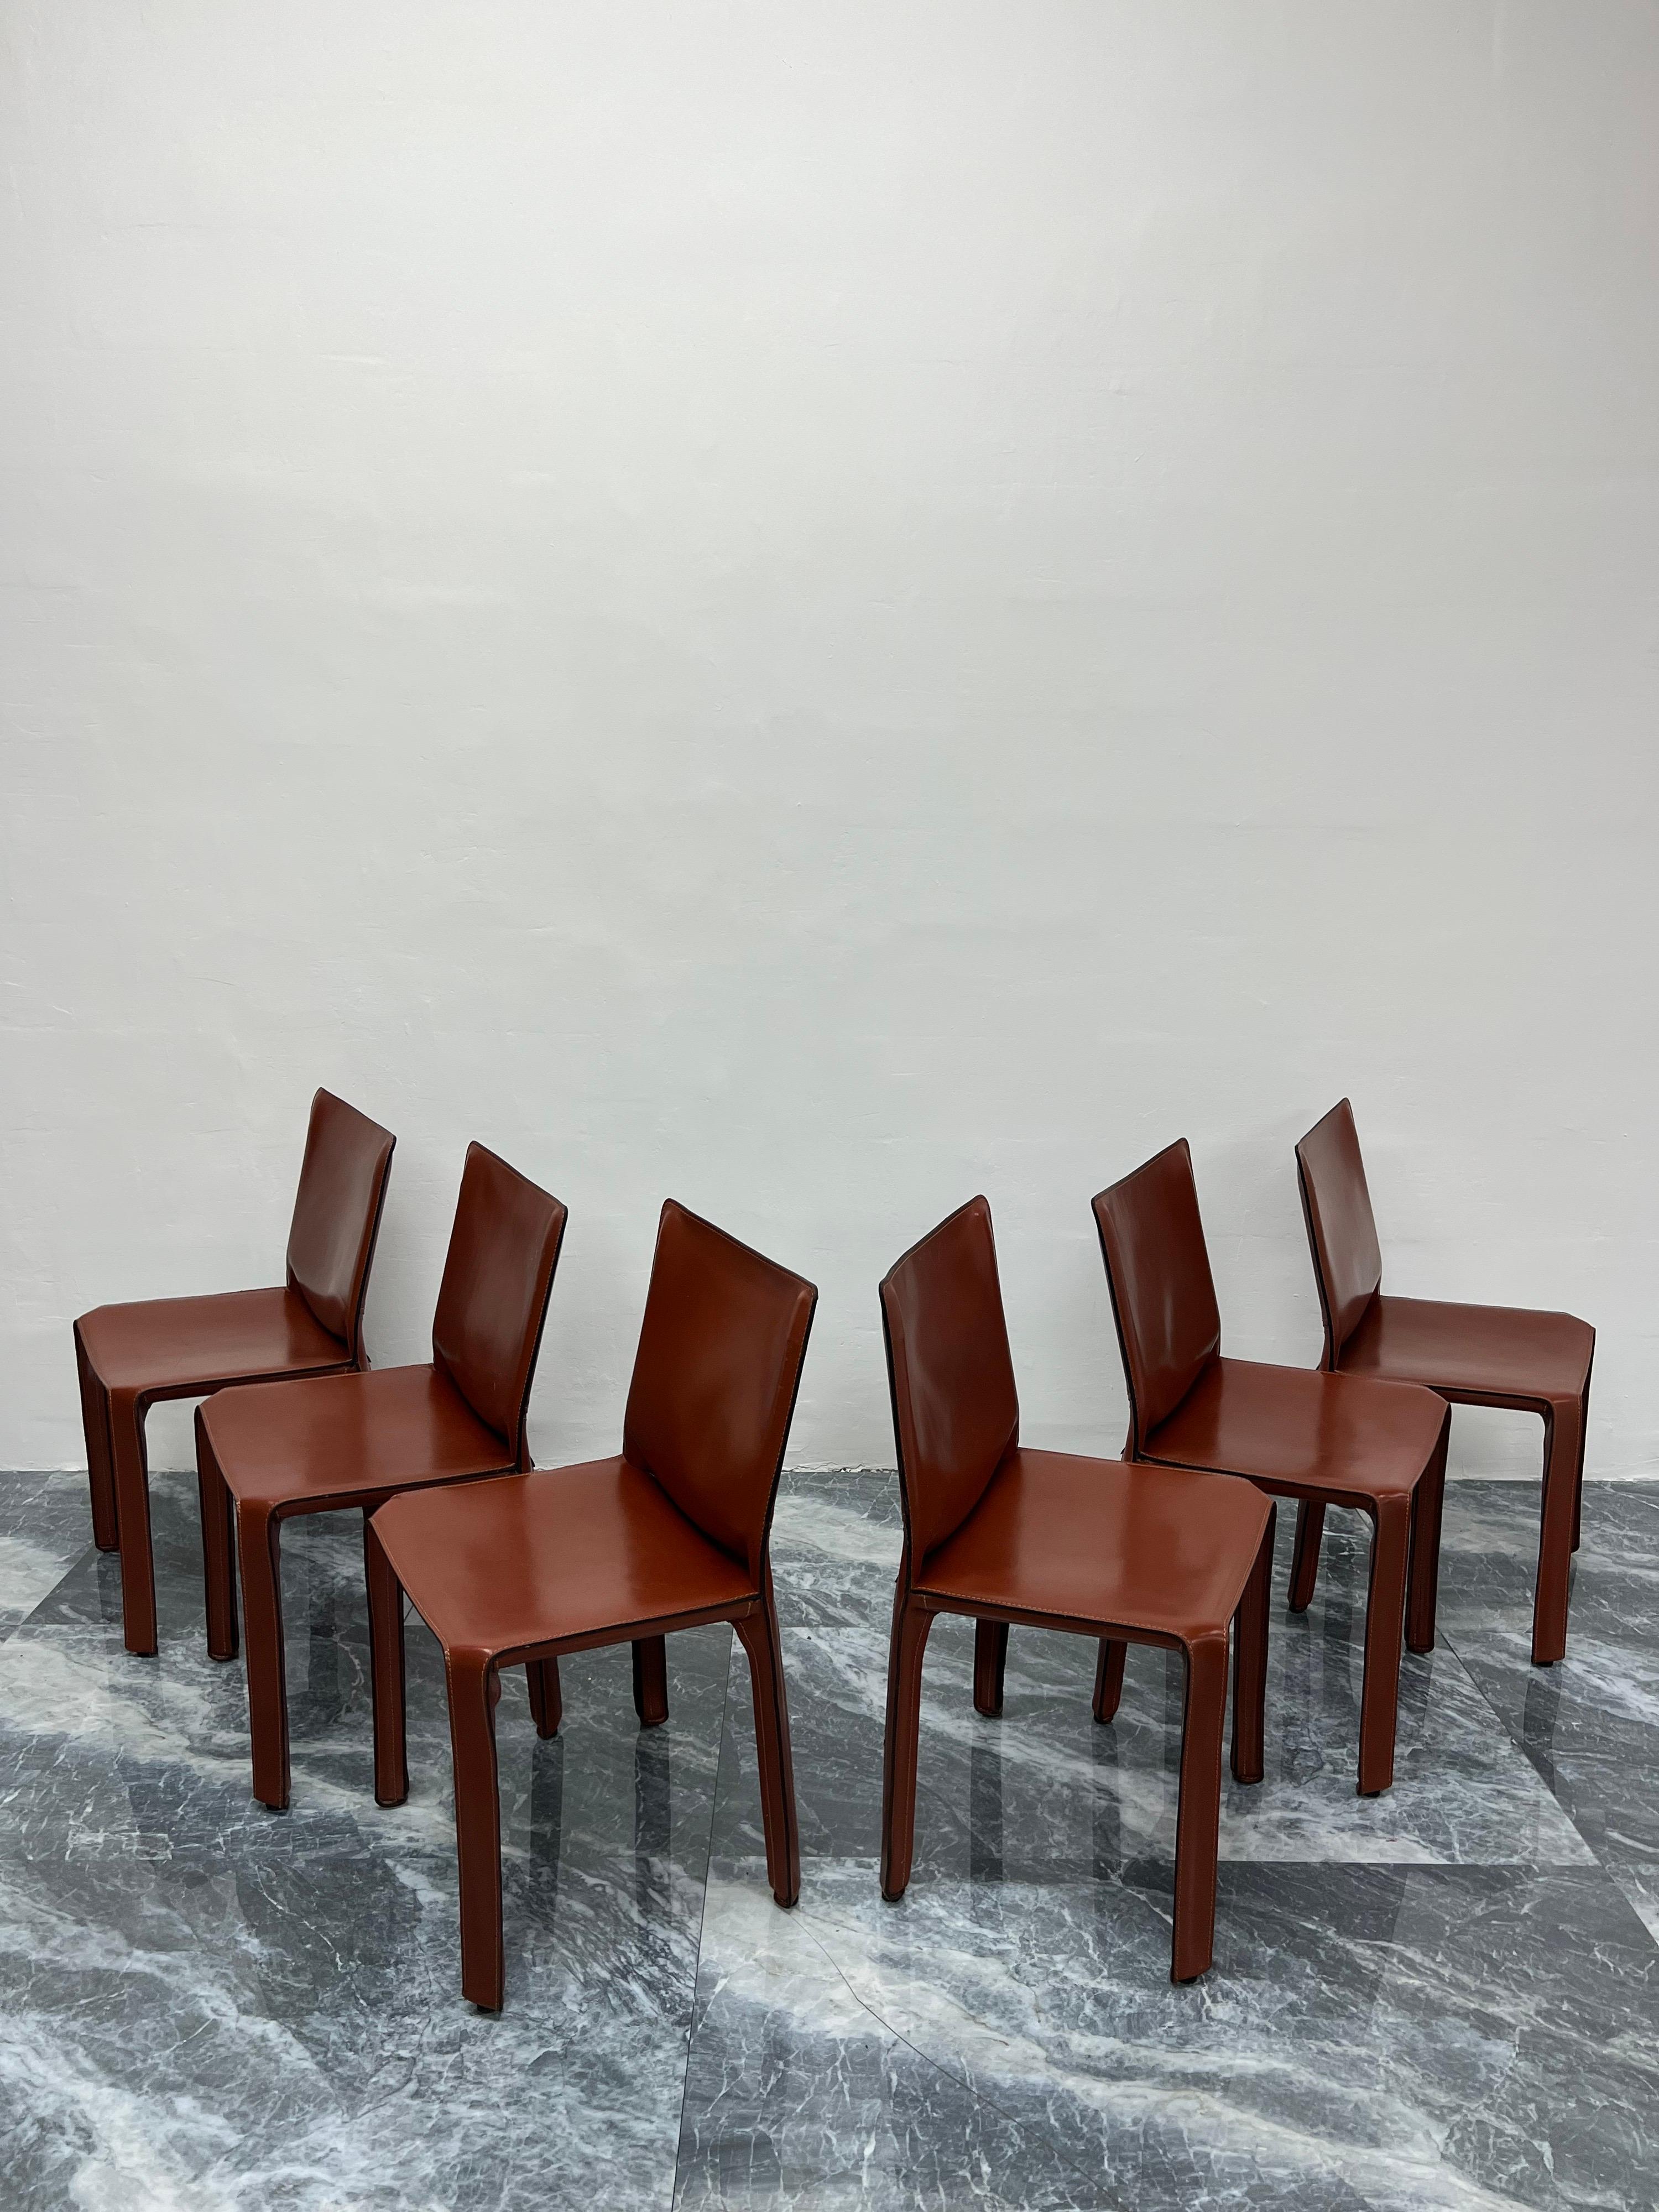 Set of six early production Cab 413 leather dining or side chairs designed by Mario Bellini for Cassina. Italy, 1970s. The leather more closely resembles burnt umber. Labeled and stamped in leather.

“This was a new kind of chair, constructed